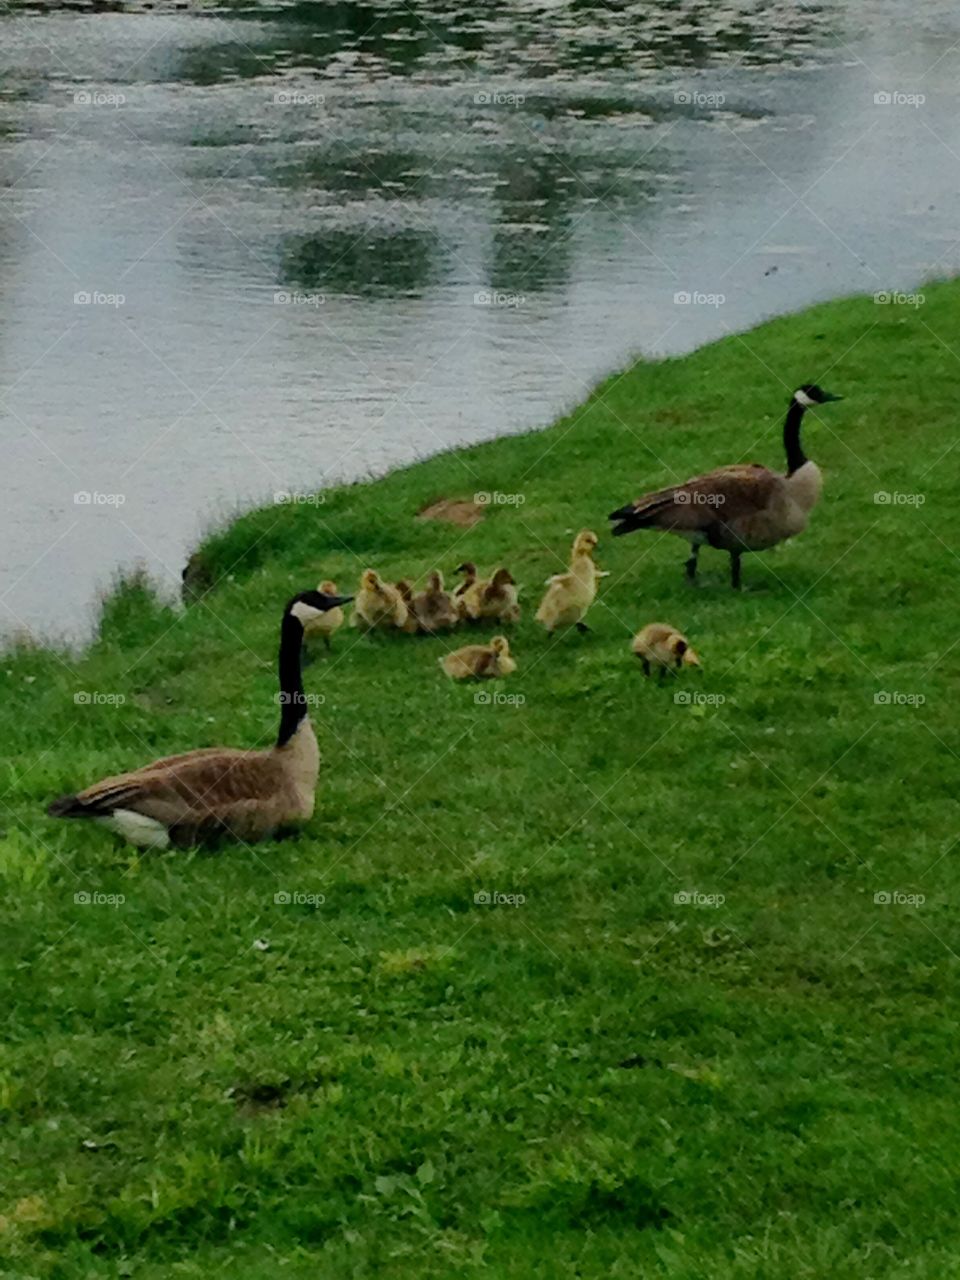 Geese family